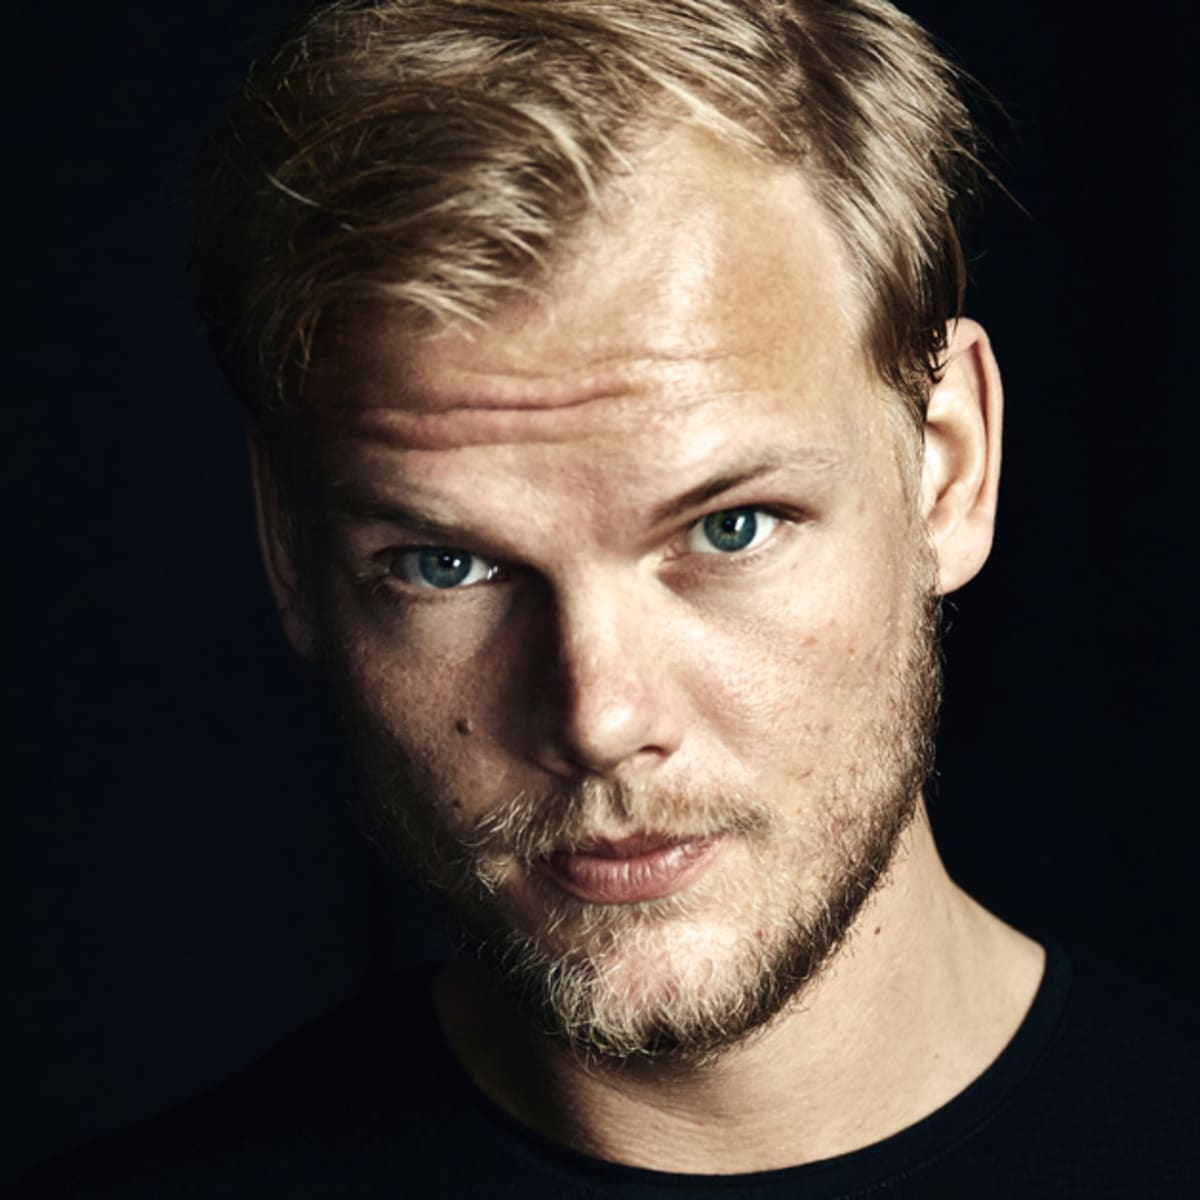 Publishing Rights For Avicii S Without You Fetch 65 000 At Auction Edm Com The Latest Electronic Dance Music News Reviews Artists